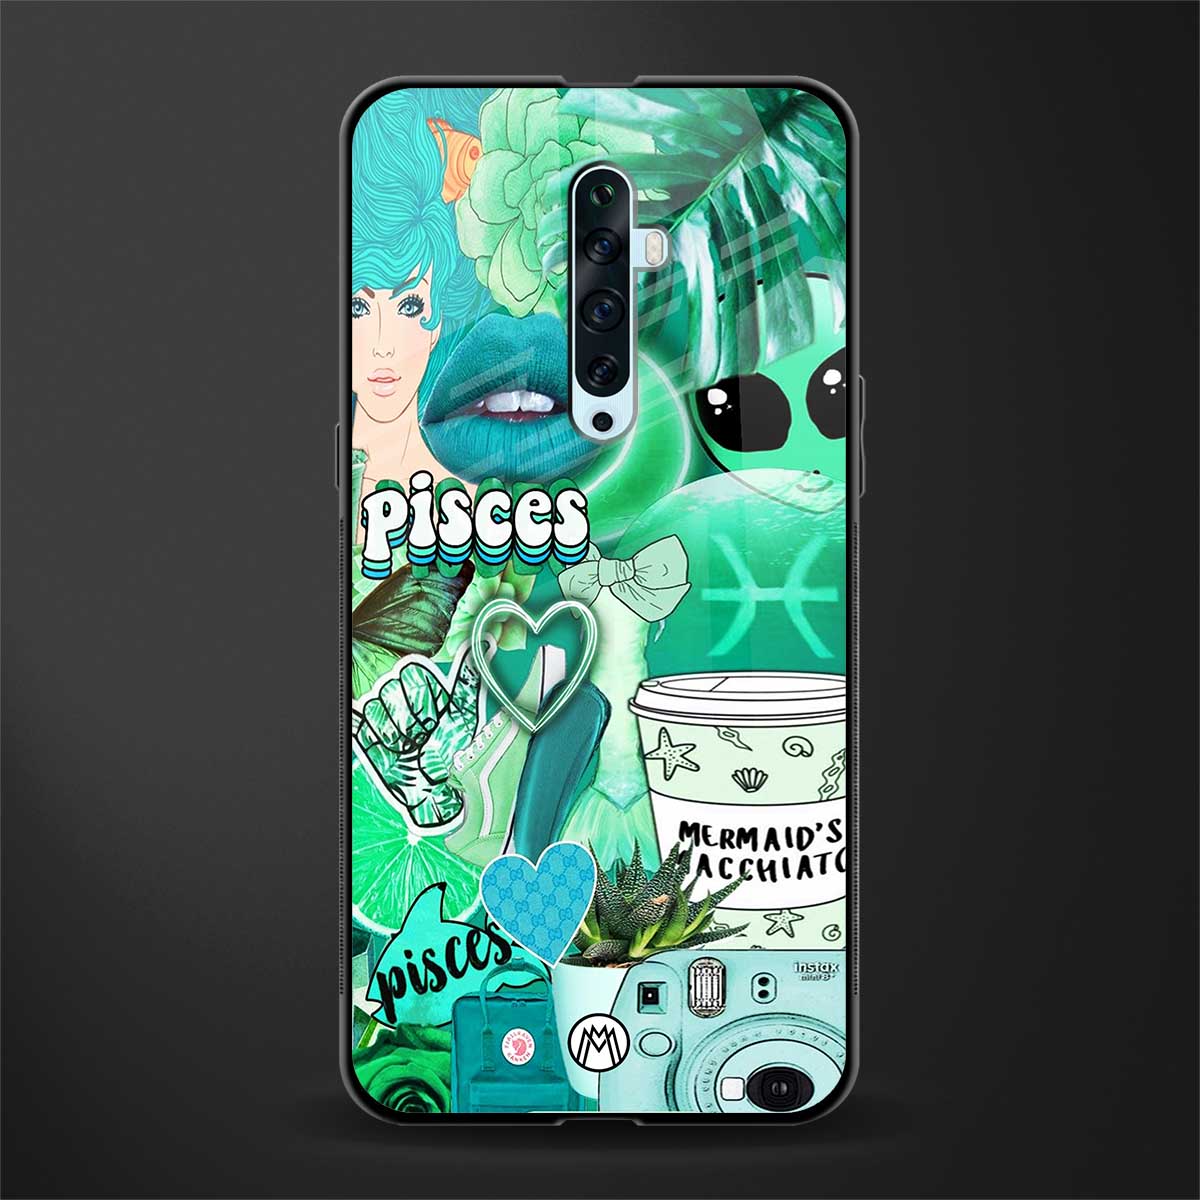 pisces aesthetic collage glass case for oppo reno 2z image